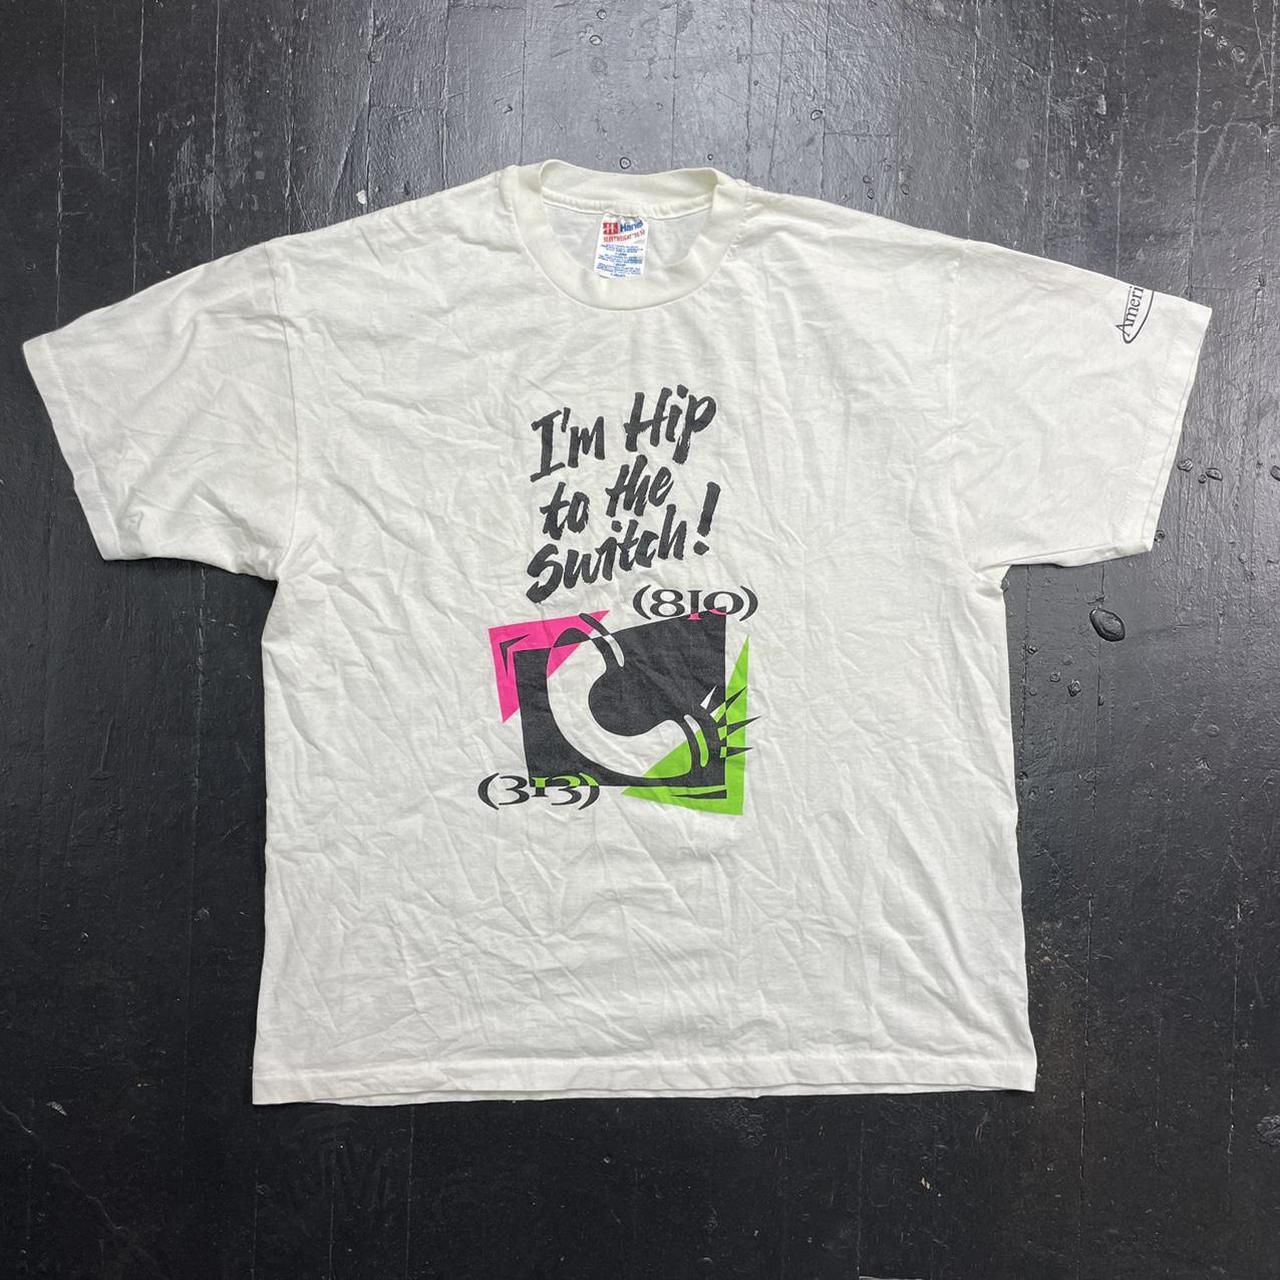 Product Image 1 - Vintage 90s "I'm Hip to